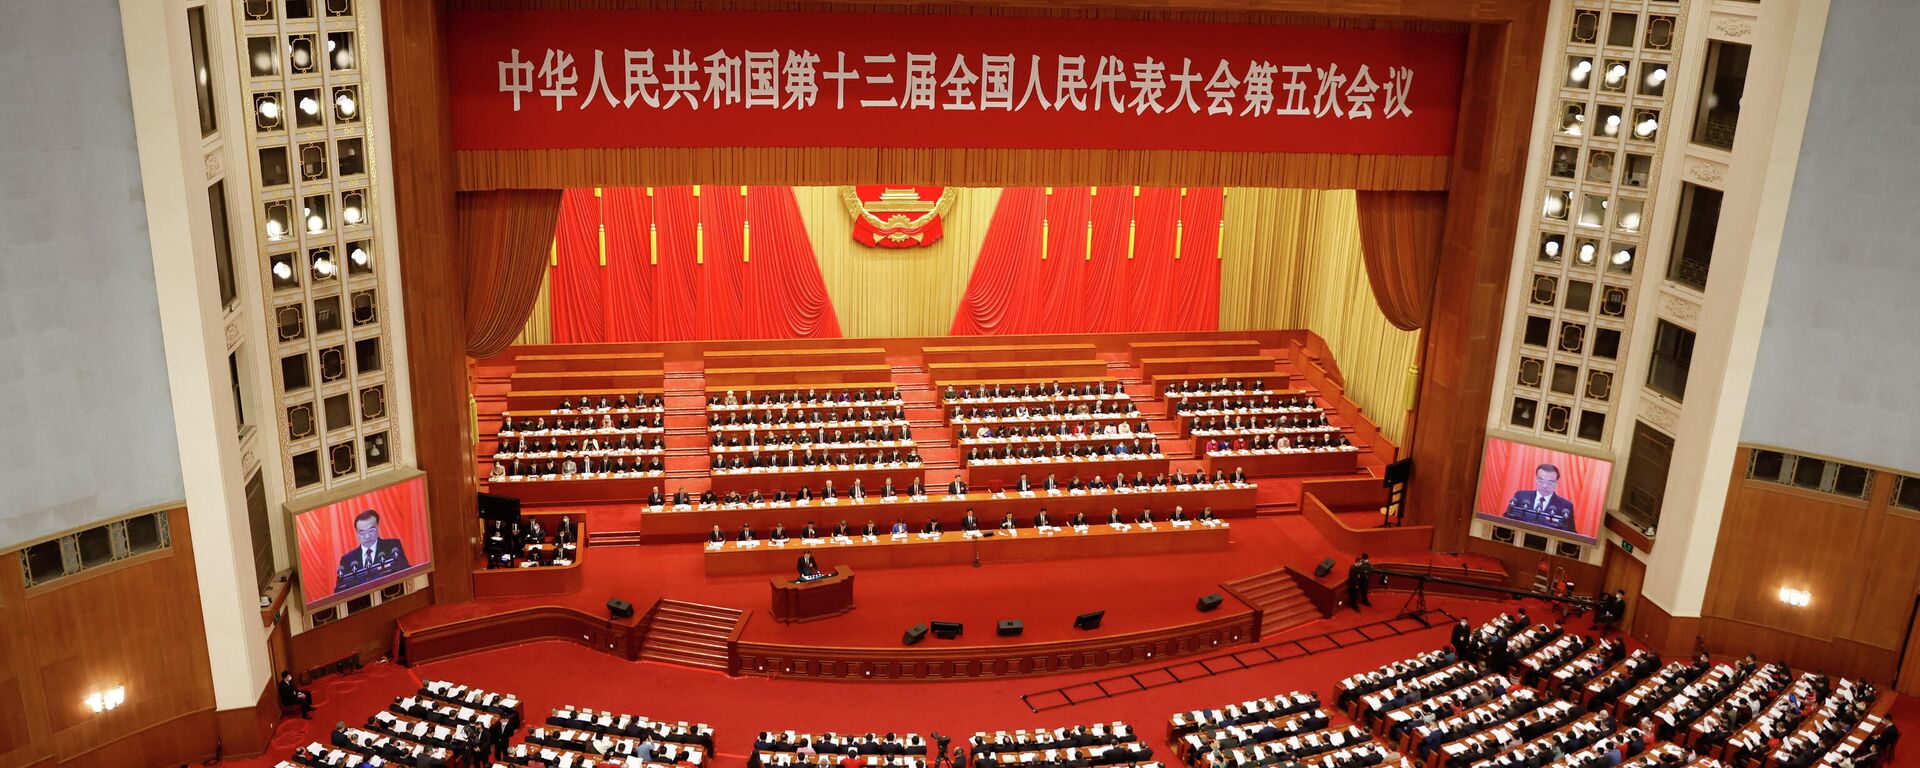 A general view of delegates attending the opening session of the National People's Congress (NPC) as Chinese Premier Li Keqiang speaks, at the Great Hall of the People in Beijing, China March 5, 2022. REUTERS/Carlos Garcia Rawlins - Sputnik International, 1920, 05.03.2022